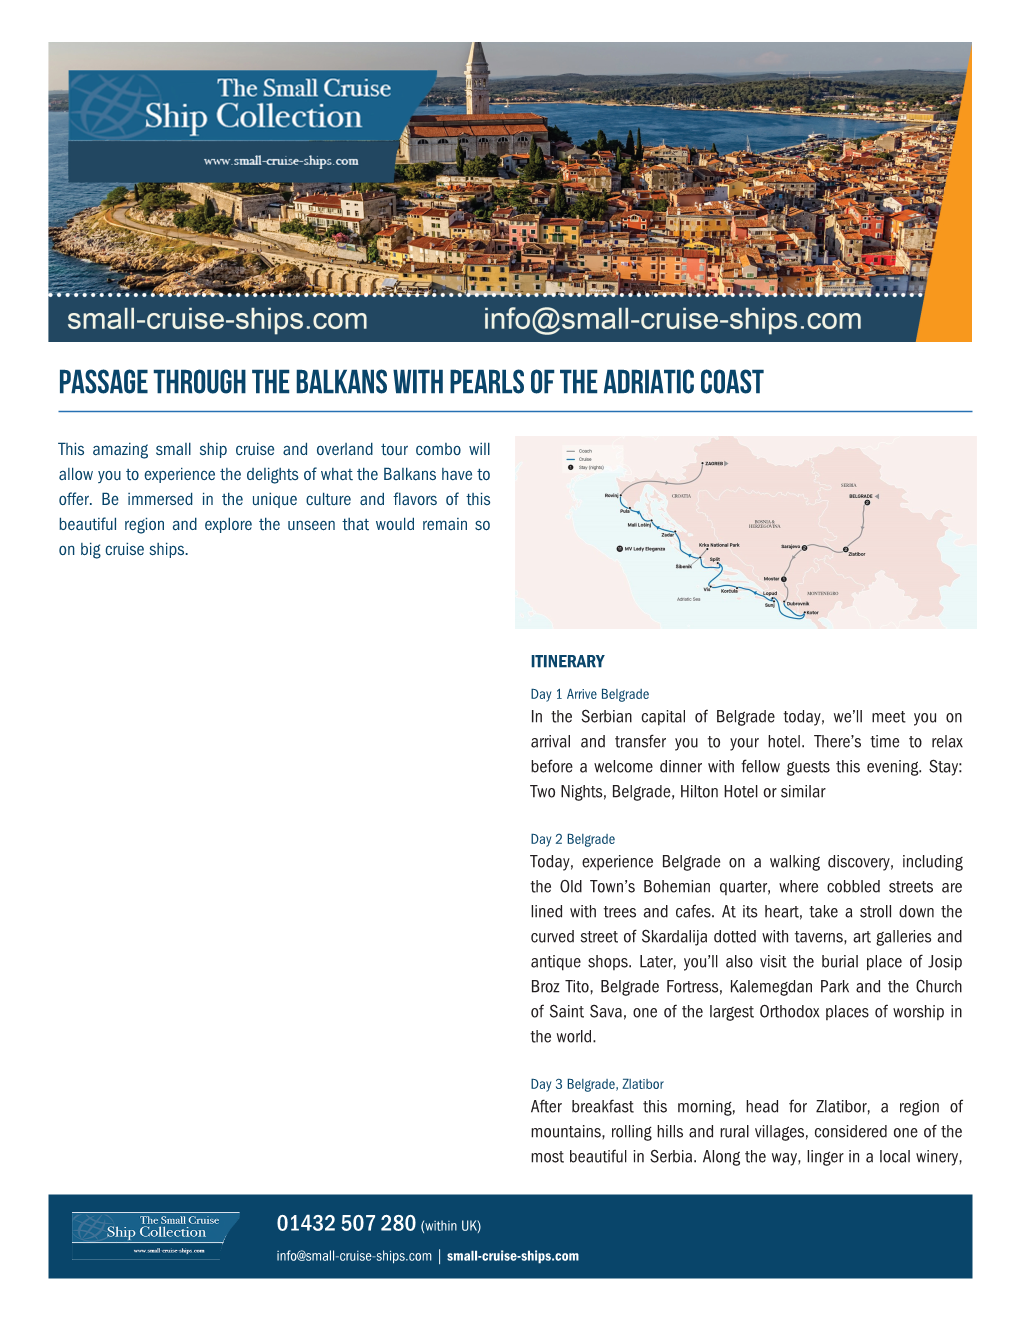 Passage Through the Balkans with Pearls of the Adriatic Coast